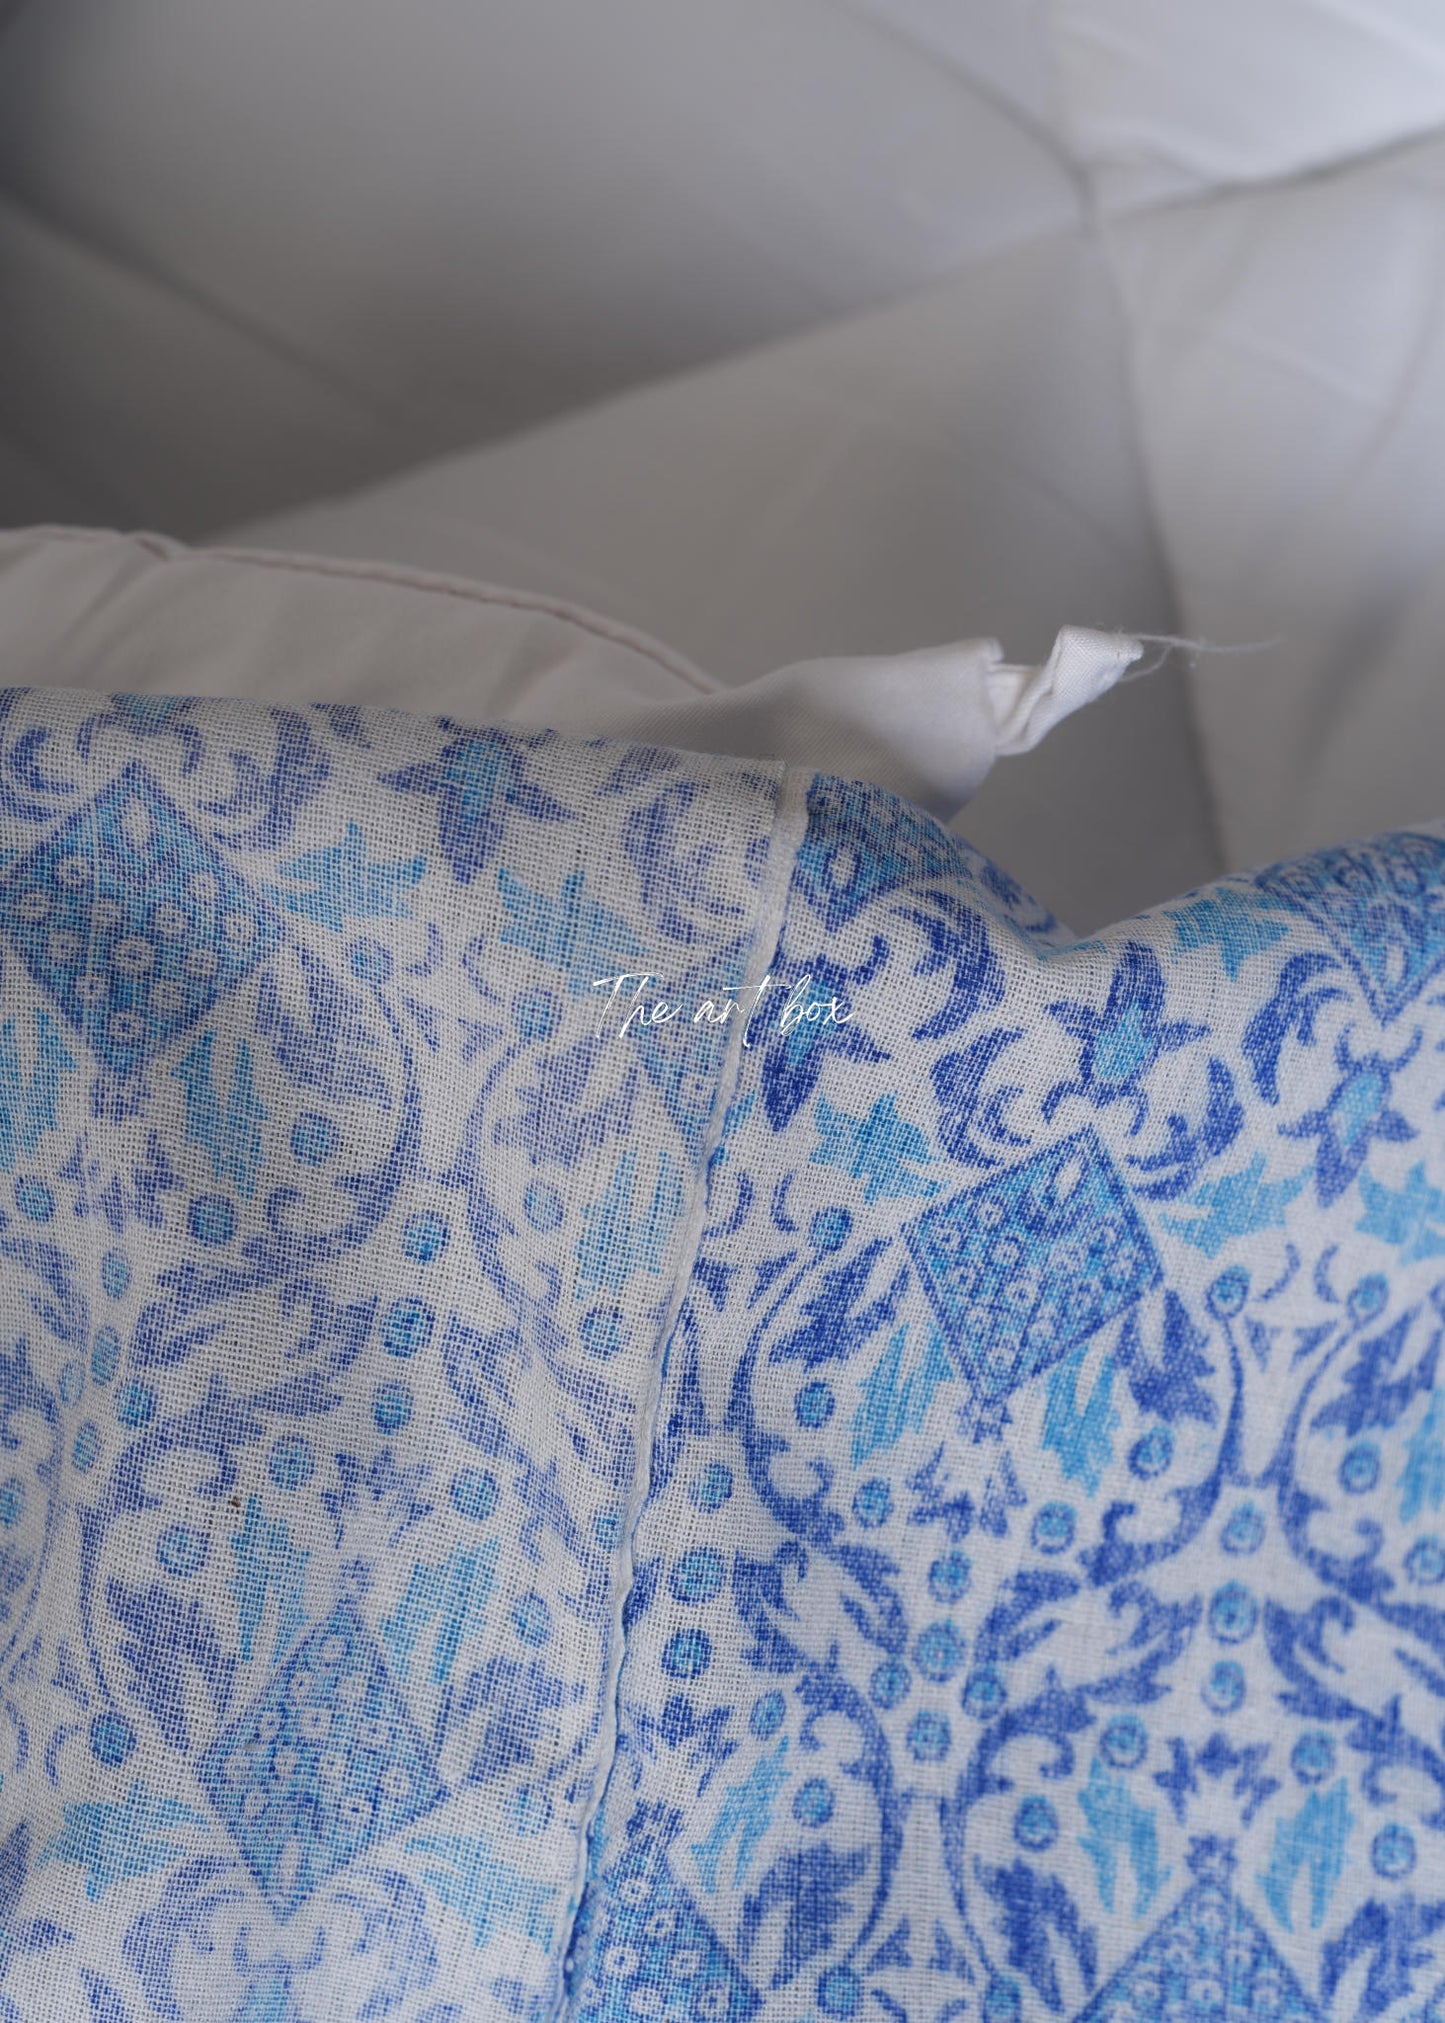 Blue Mandala Duvet Covers with Pillow Covers